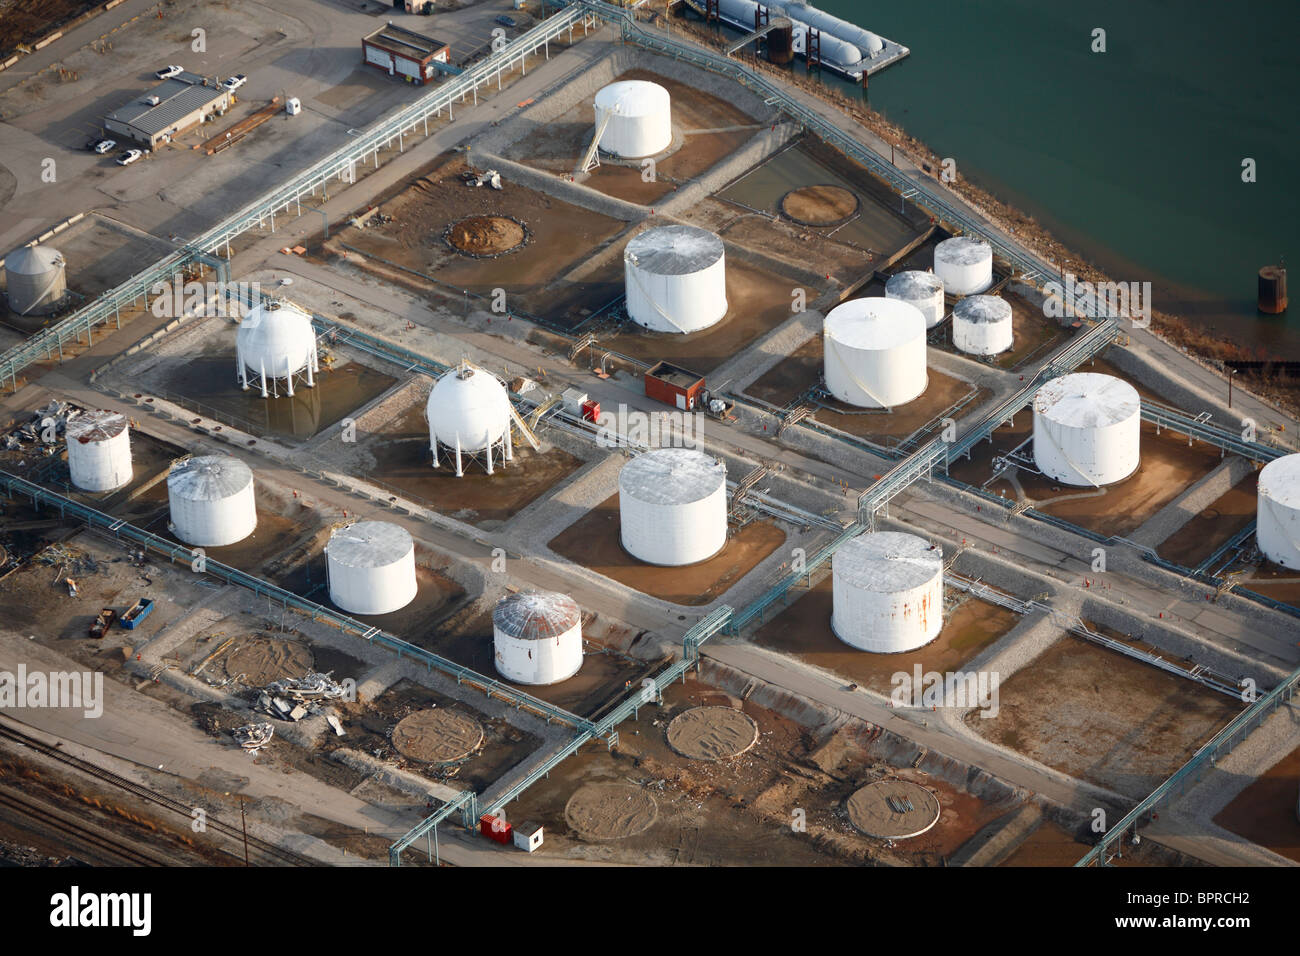 Aerial view of a petroleum Stock Photo